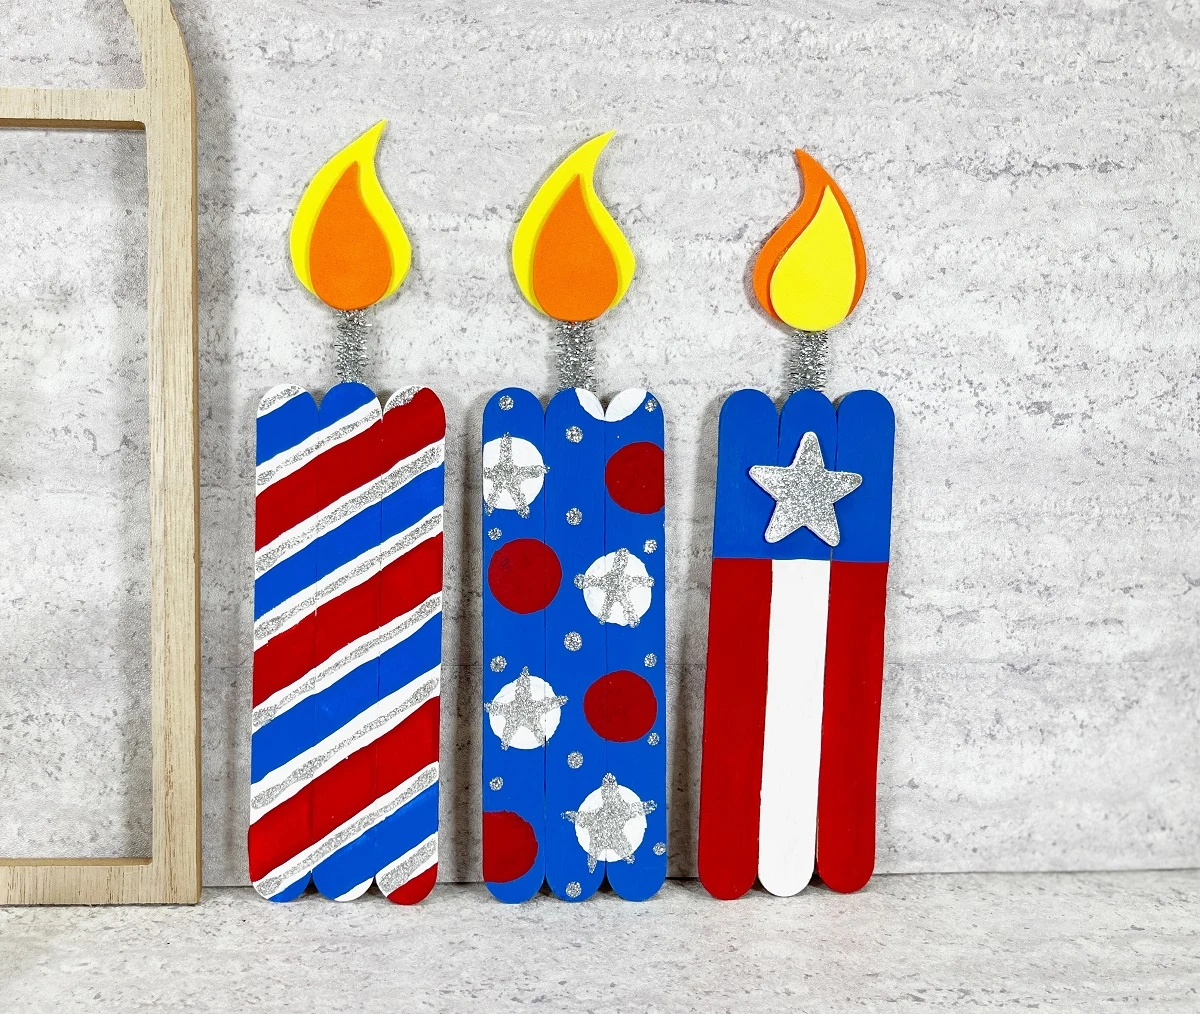 Three completed firecracker crafts made with jumbo craft sticks. Each one is painted in a different design using red, white, and blue paints. One is striped, another has polka dots, and another is flag inspired.